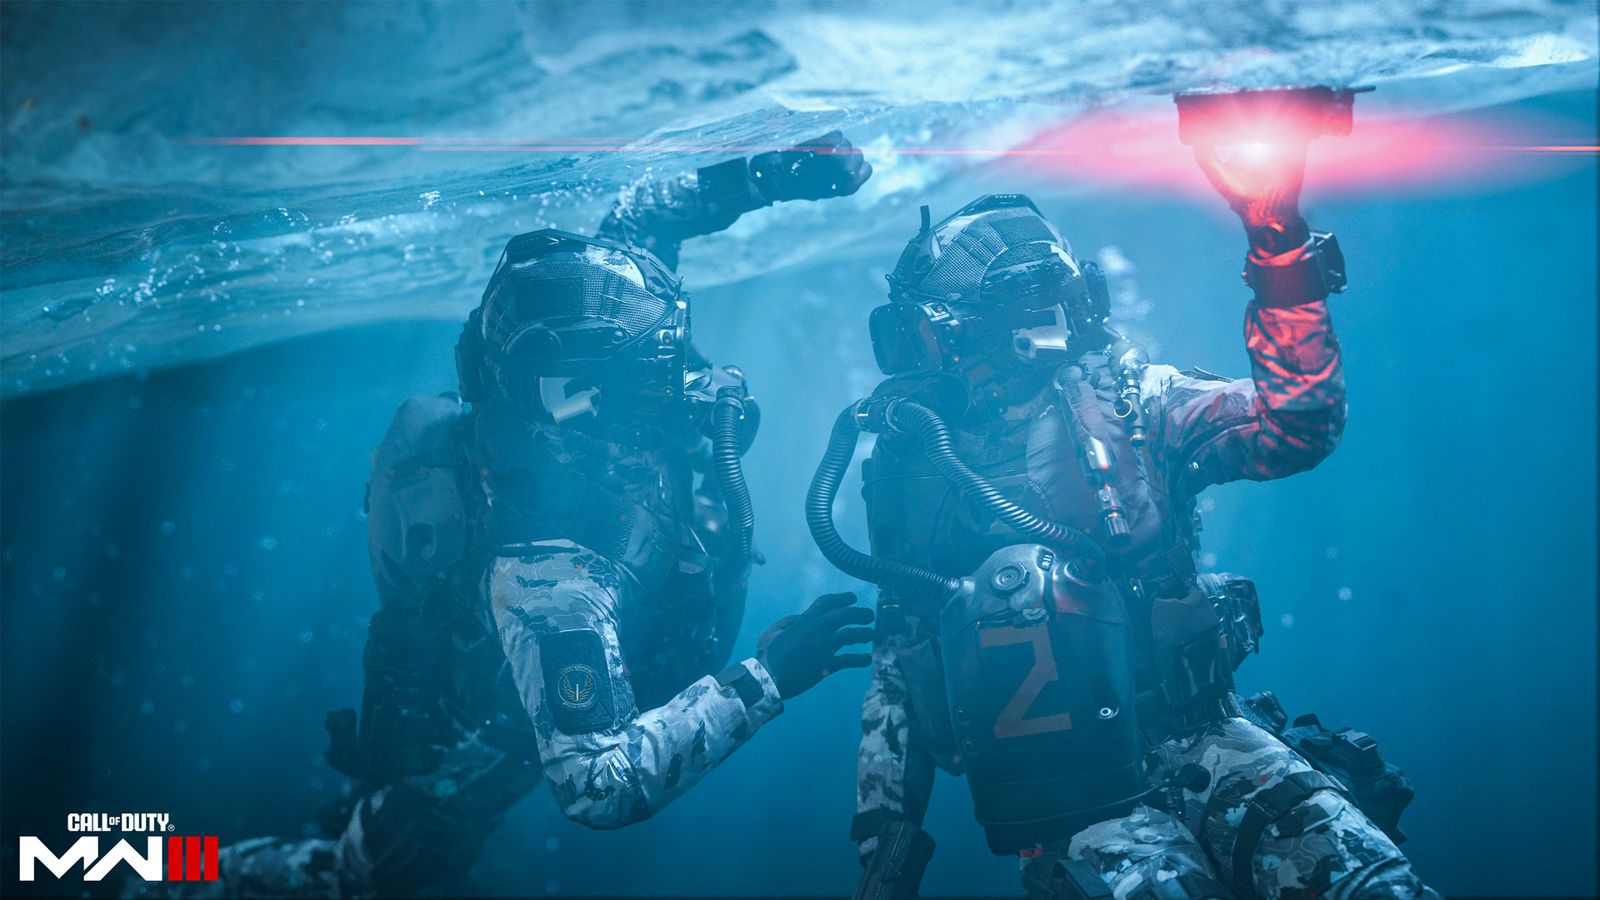 Modern Warfare 3 campaign mode featuring two covert operatives on an underwater mission